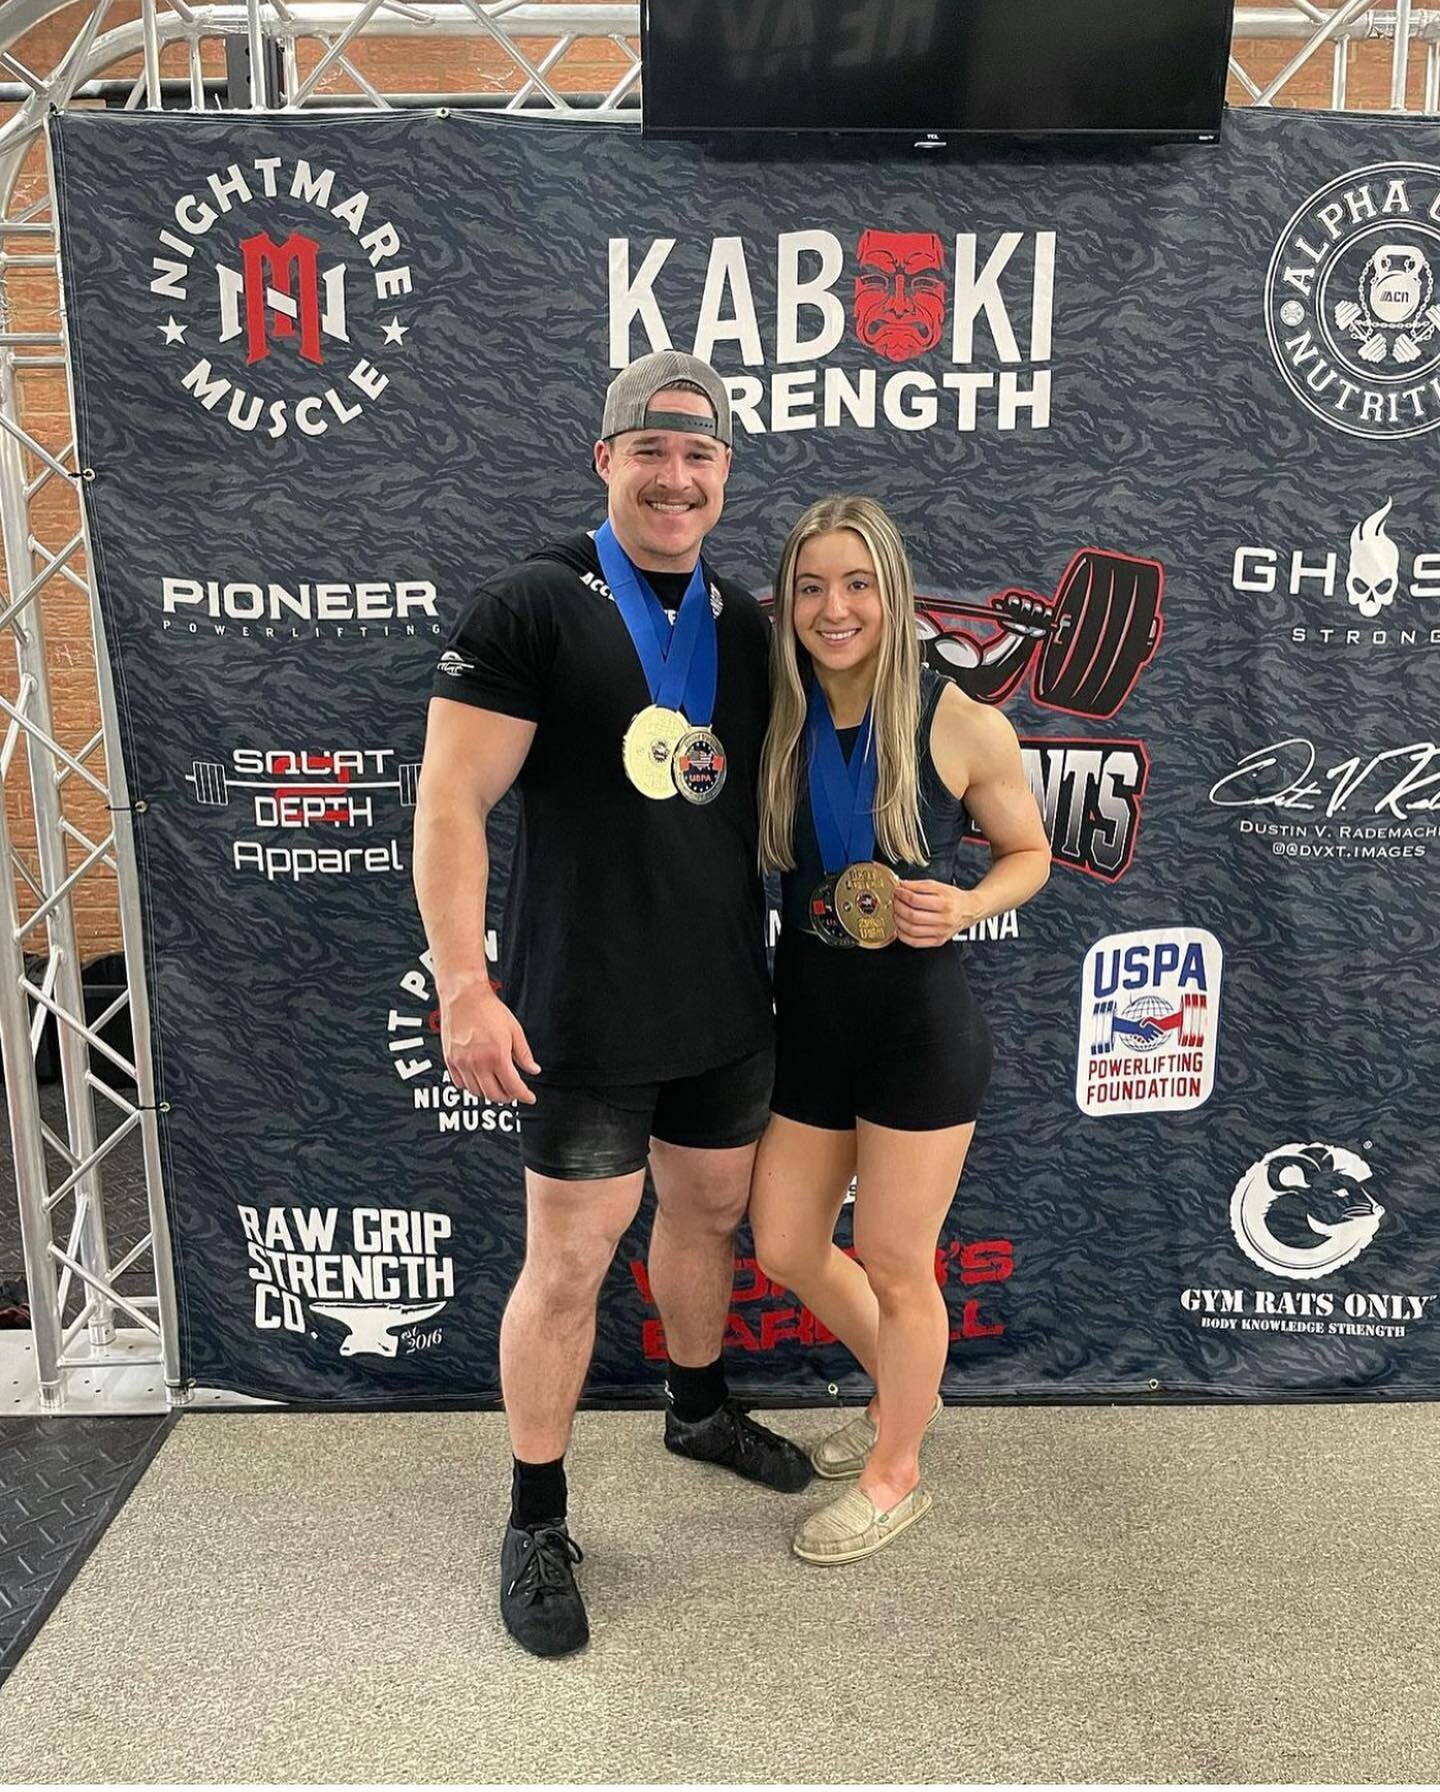 Big congratulations to two of our members @five0.three.one and @amoe_  for their performance this weekend at the Charlotte Open!

This power couple won best male and female lifter AND Austin set a few state records! #uspa #powerlifting #powerliftingm